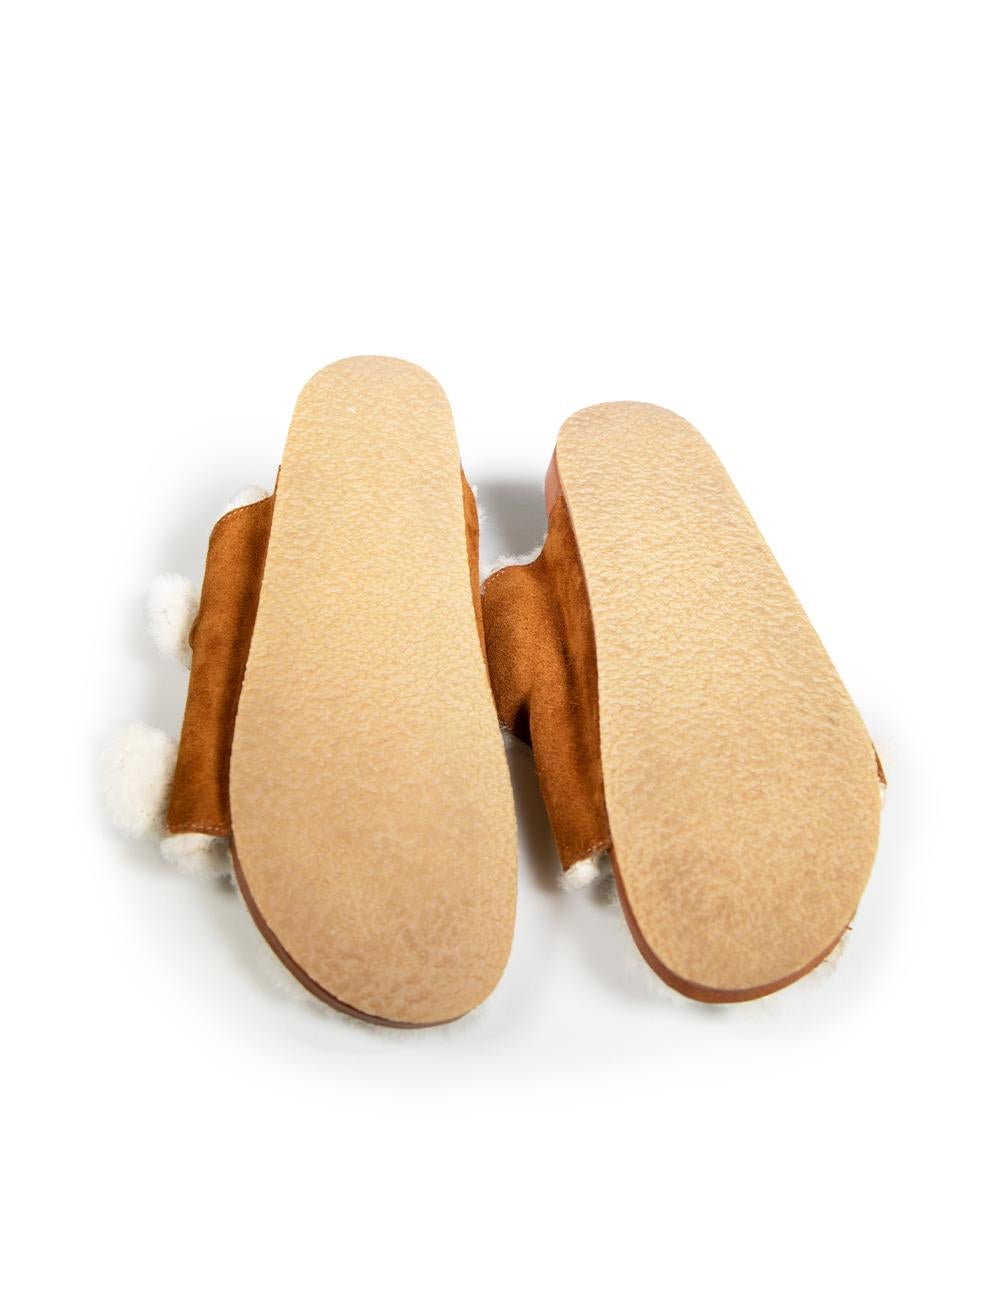 Women's Vanessa Bruno Brown Suede Shearling Lined Slides Size EU 40 For Sale